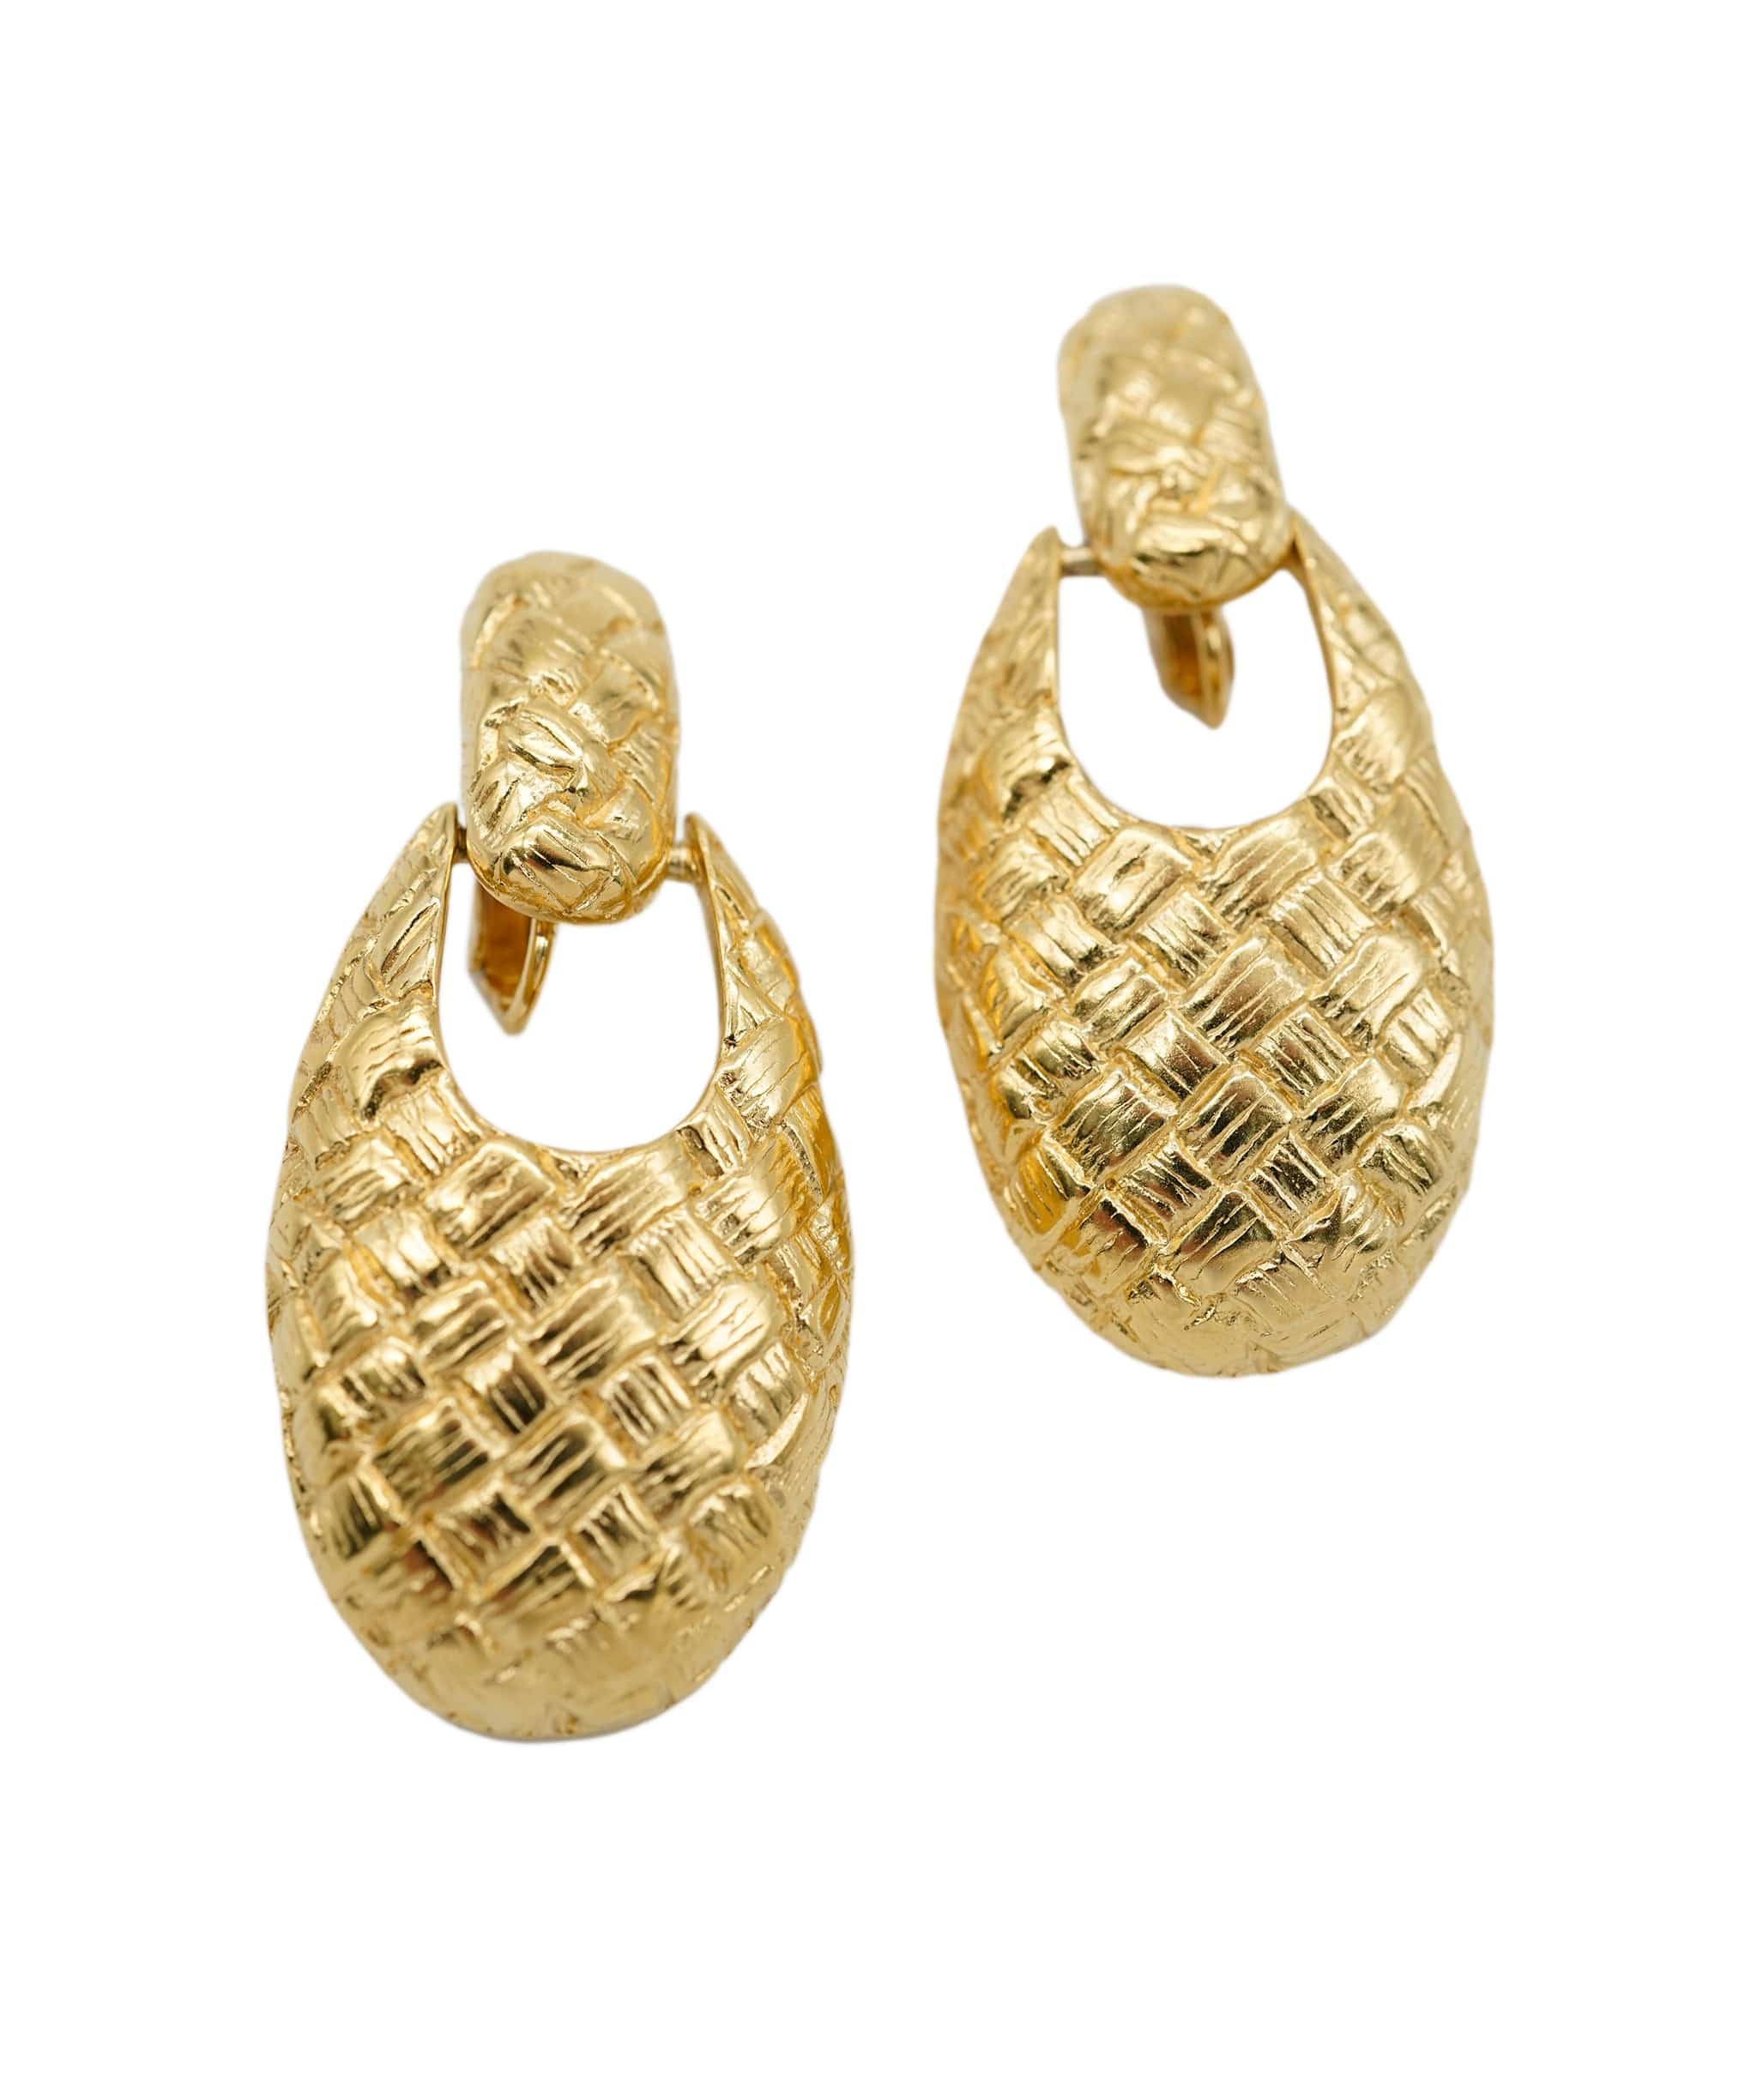 LuxuryPromise Vintage Givenchy Intrecciato Earrings 1980s AEL1113